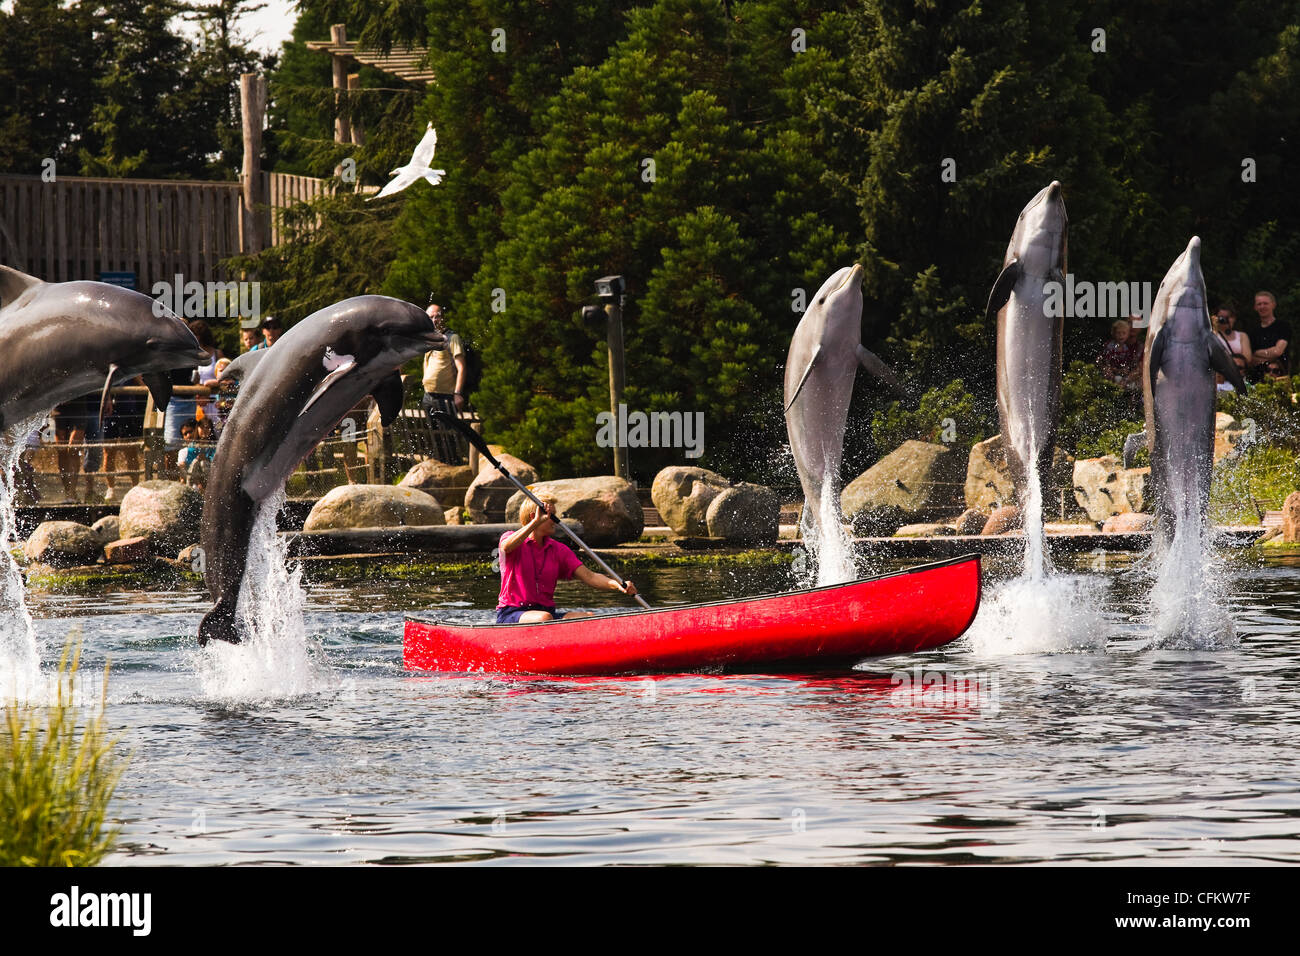 Female dolphin keeper in rowing boat having fun with Bottlenose dolphins jumping high out of the water. Stock Photo